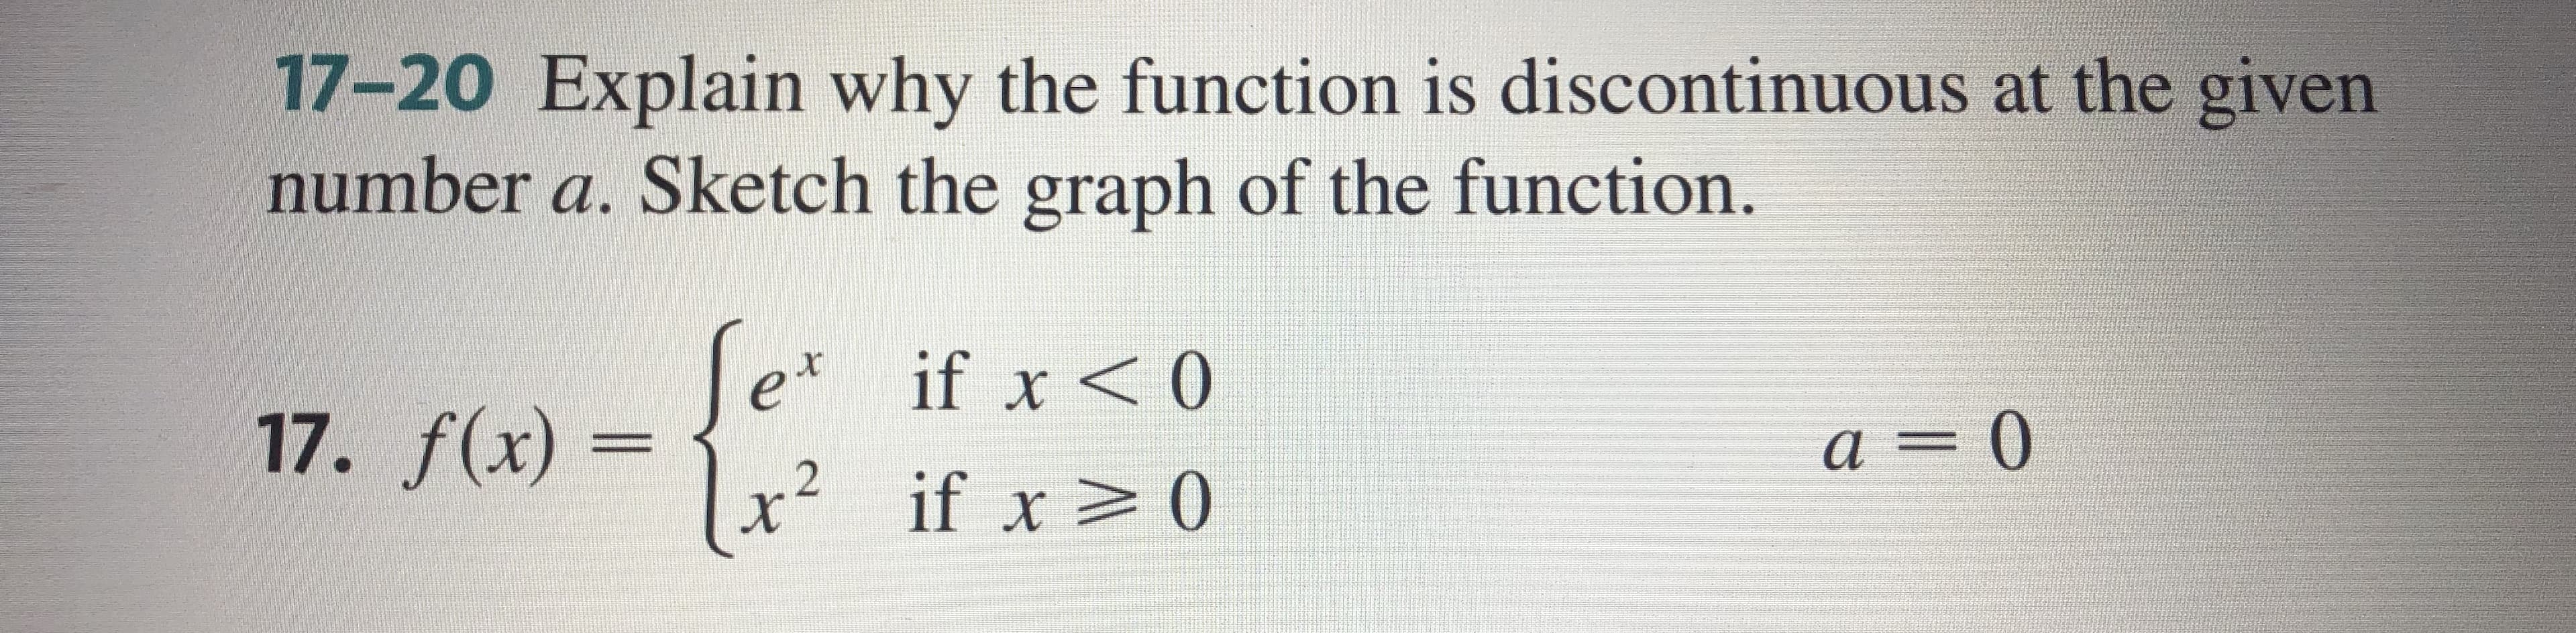 17-20 Explain why the function is discontinuous at the given
number a. Sketch the graph of the function.
Te* if x <0
|x² if x 0
17. f(x) =
a = 0
